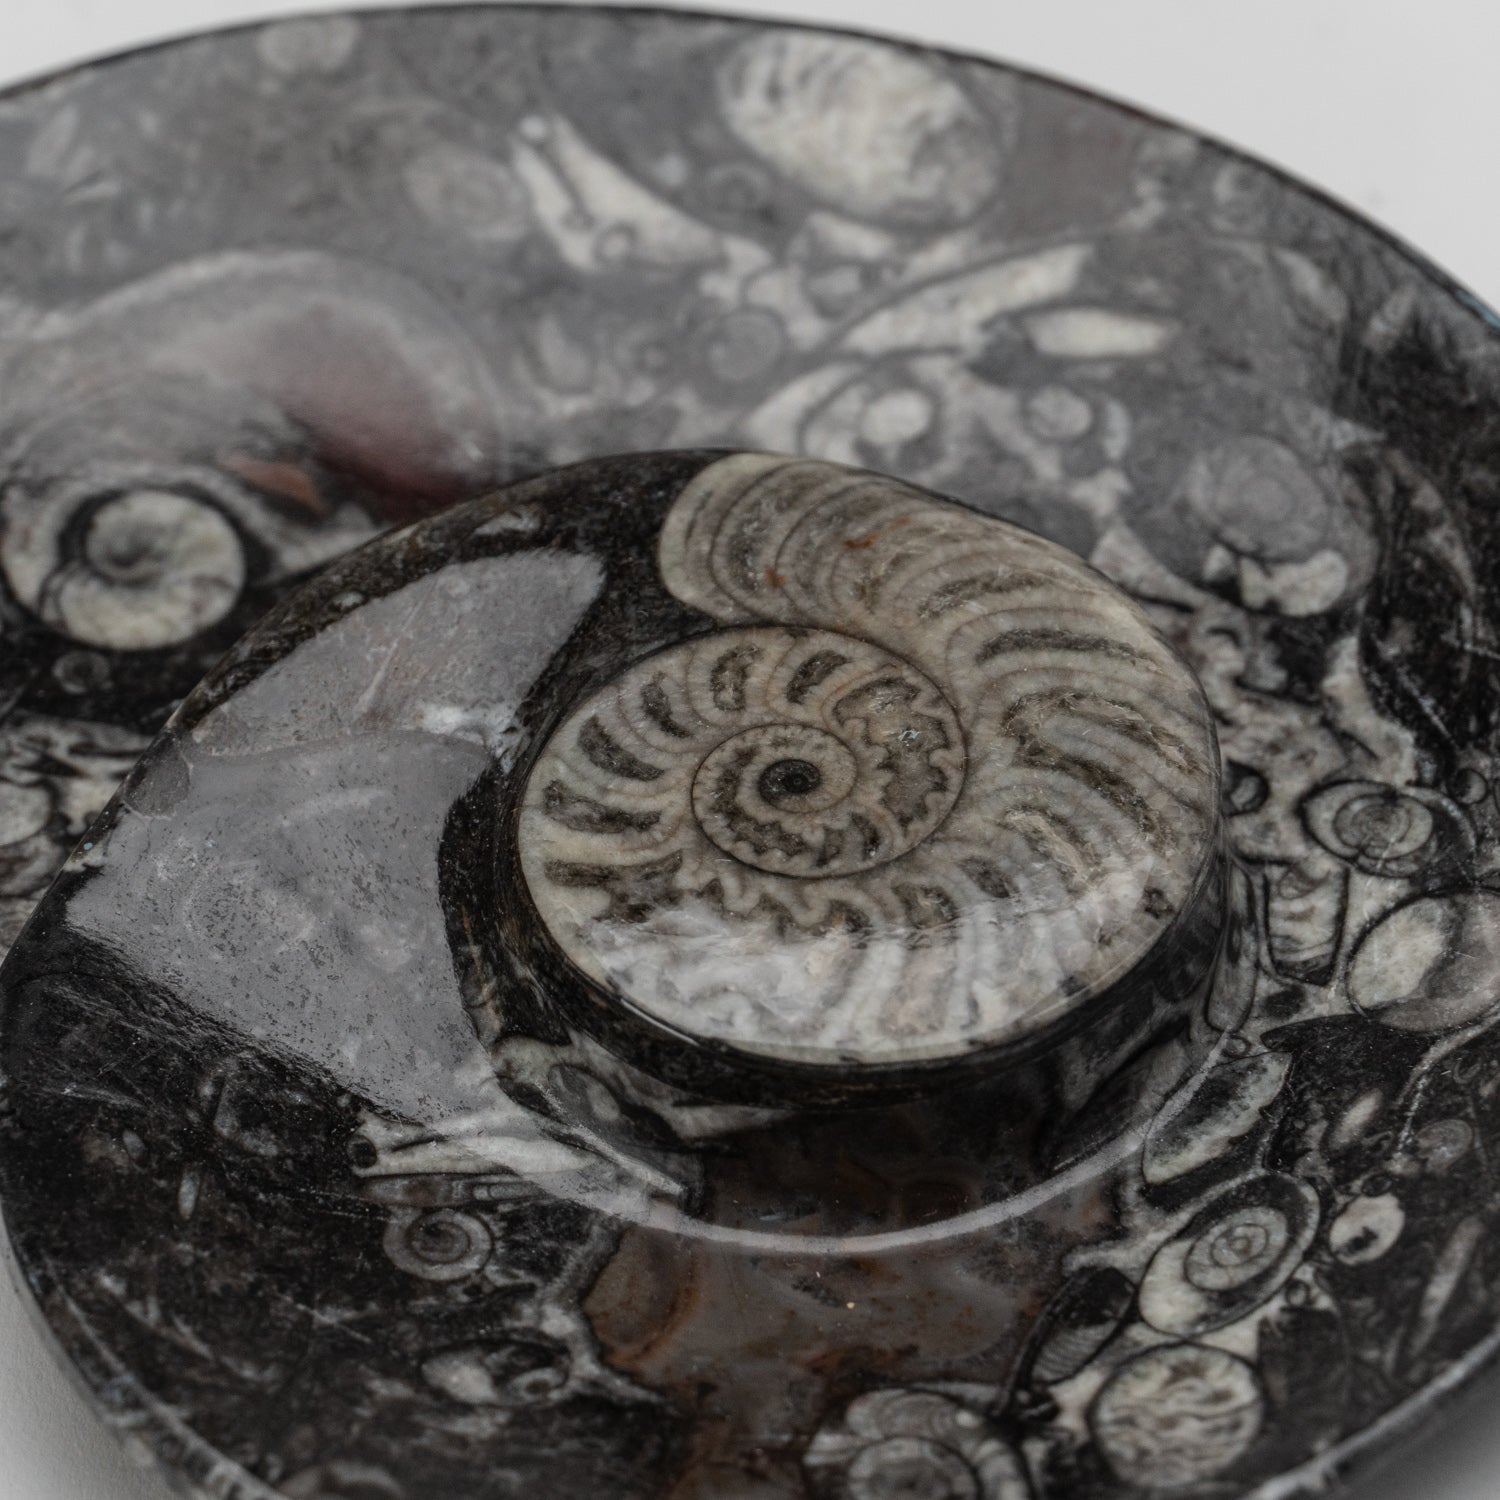 Polished Ammonite and Orthoceras Fossil Spiral Plate (Large)